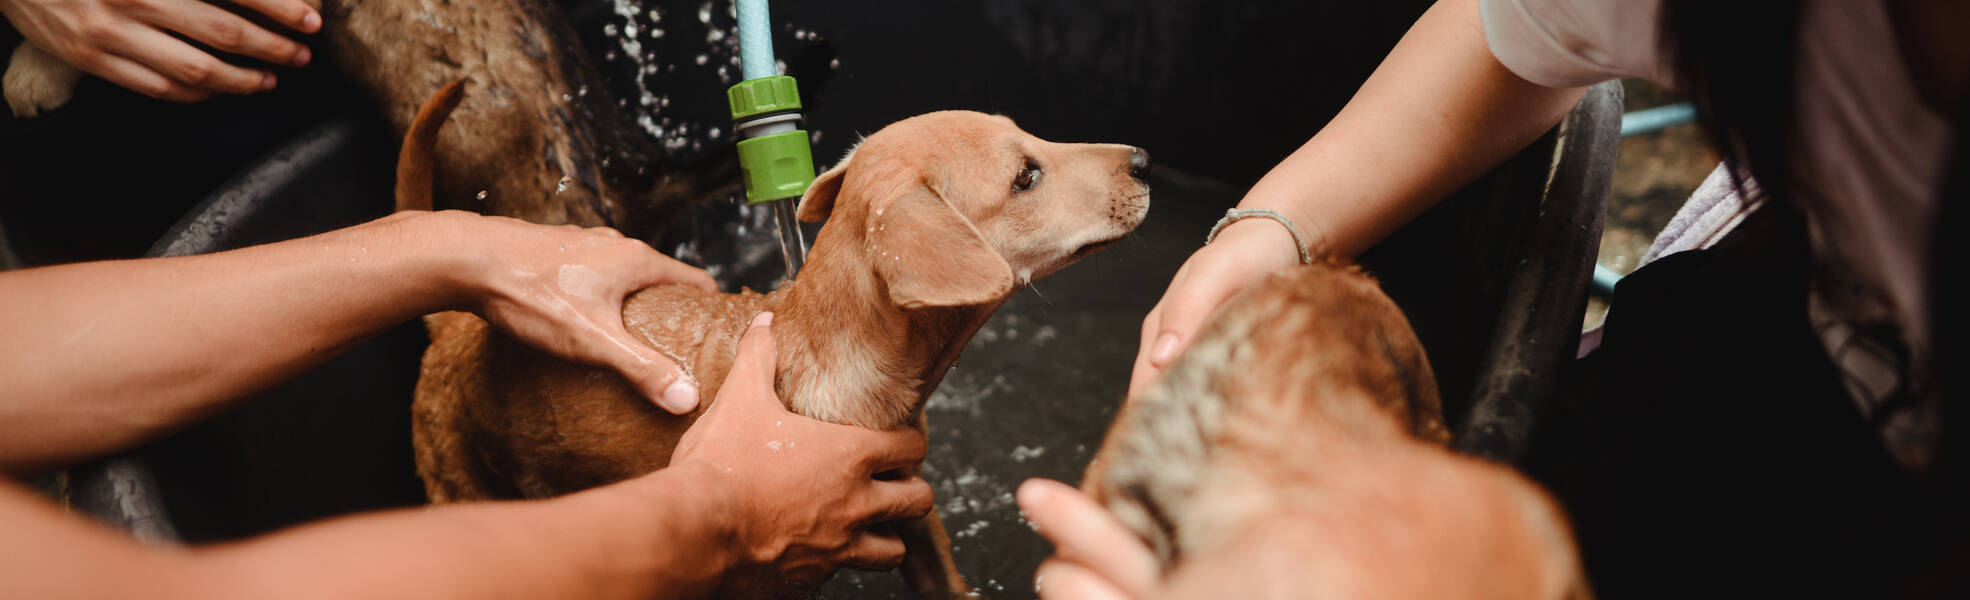 Animal shelters abroad: Dogs are washed